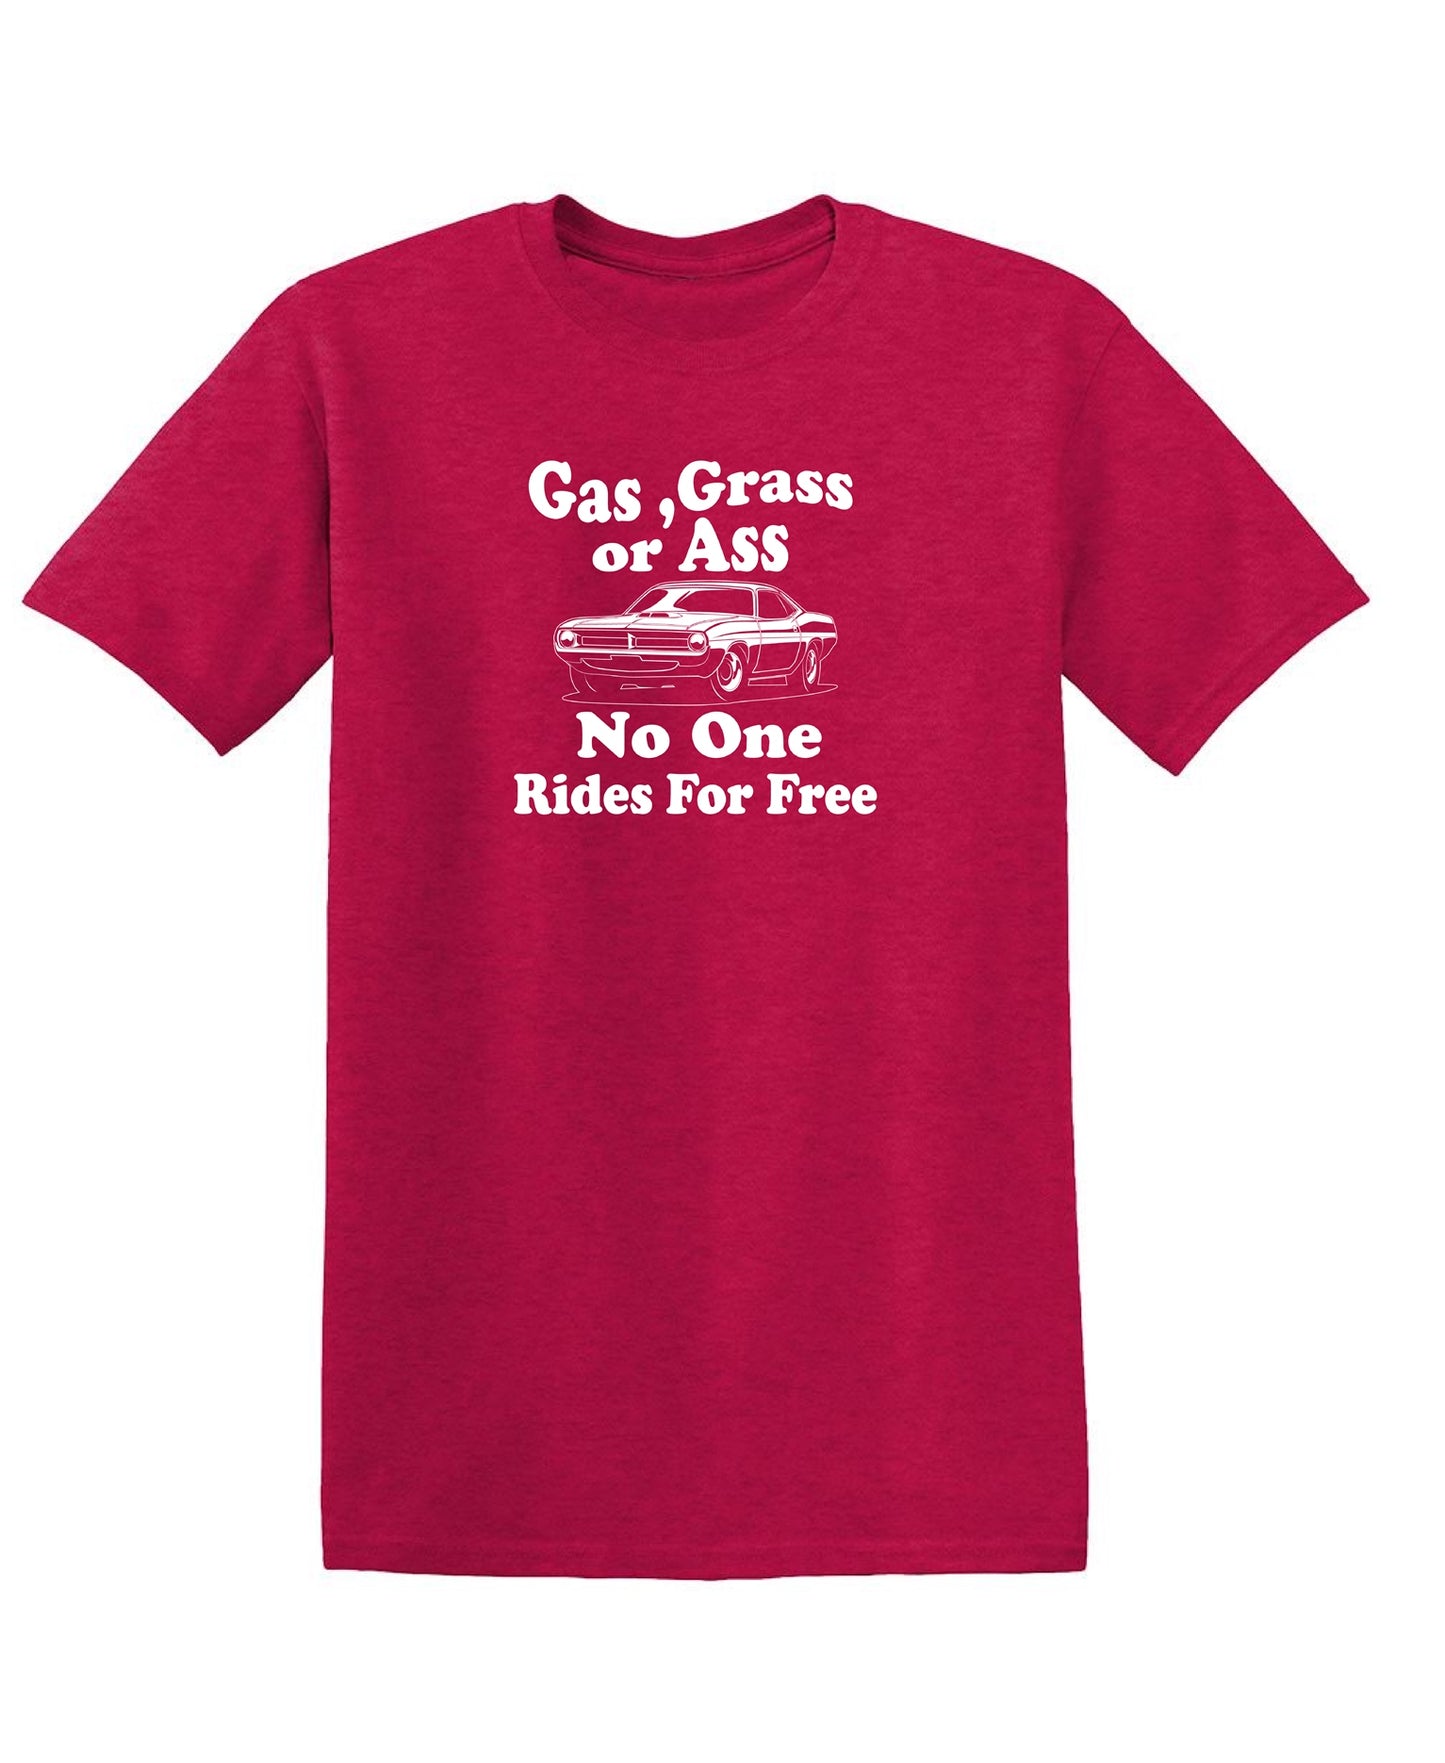 Gas,Grass or Ass No One Rides For Free - Funny T Shirts & Graphic Tees